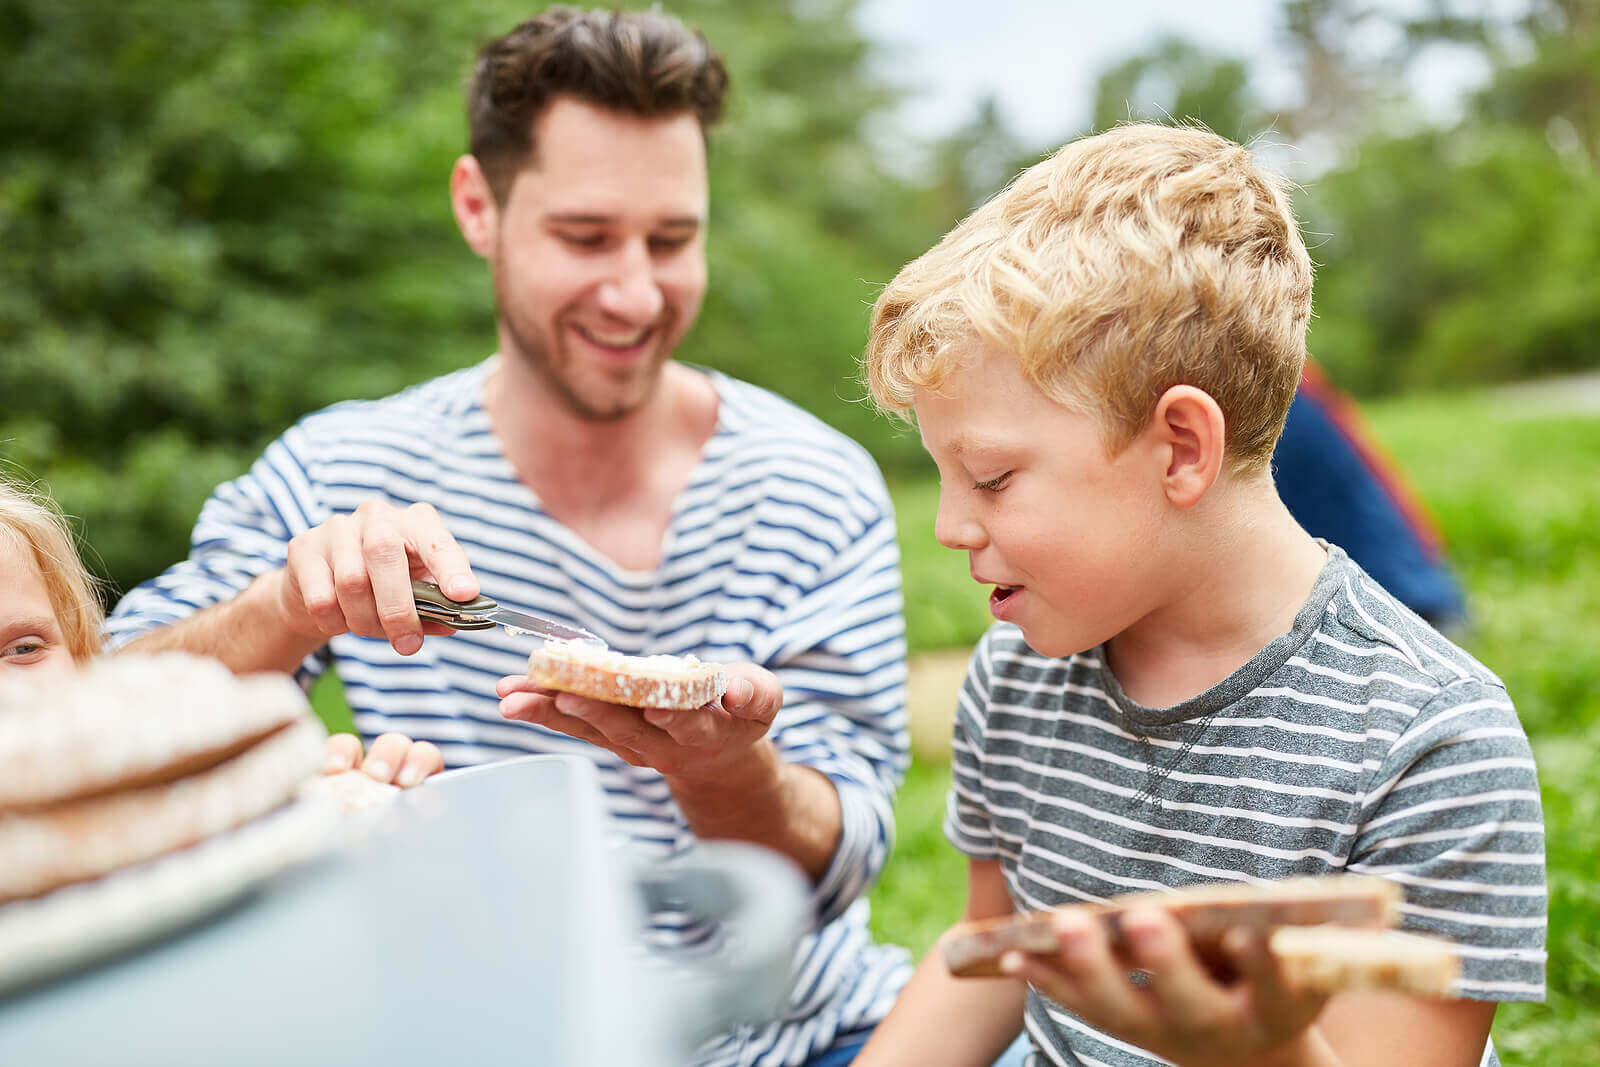 What to Bring Along to Eat on a Family Picnic